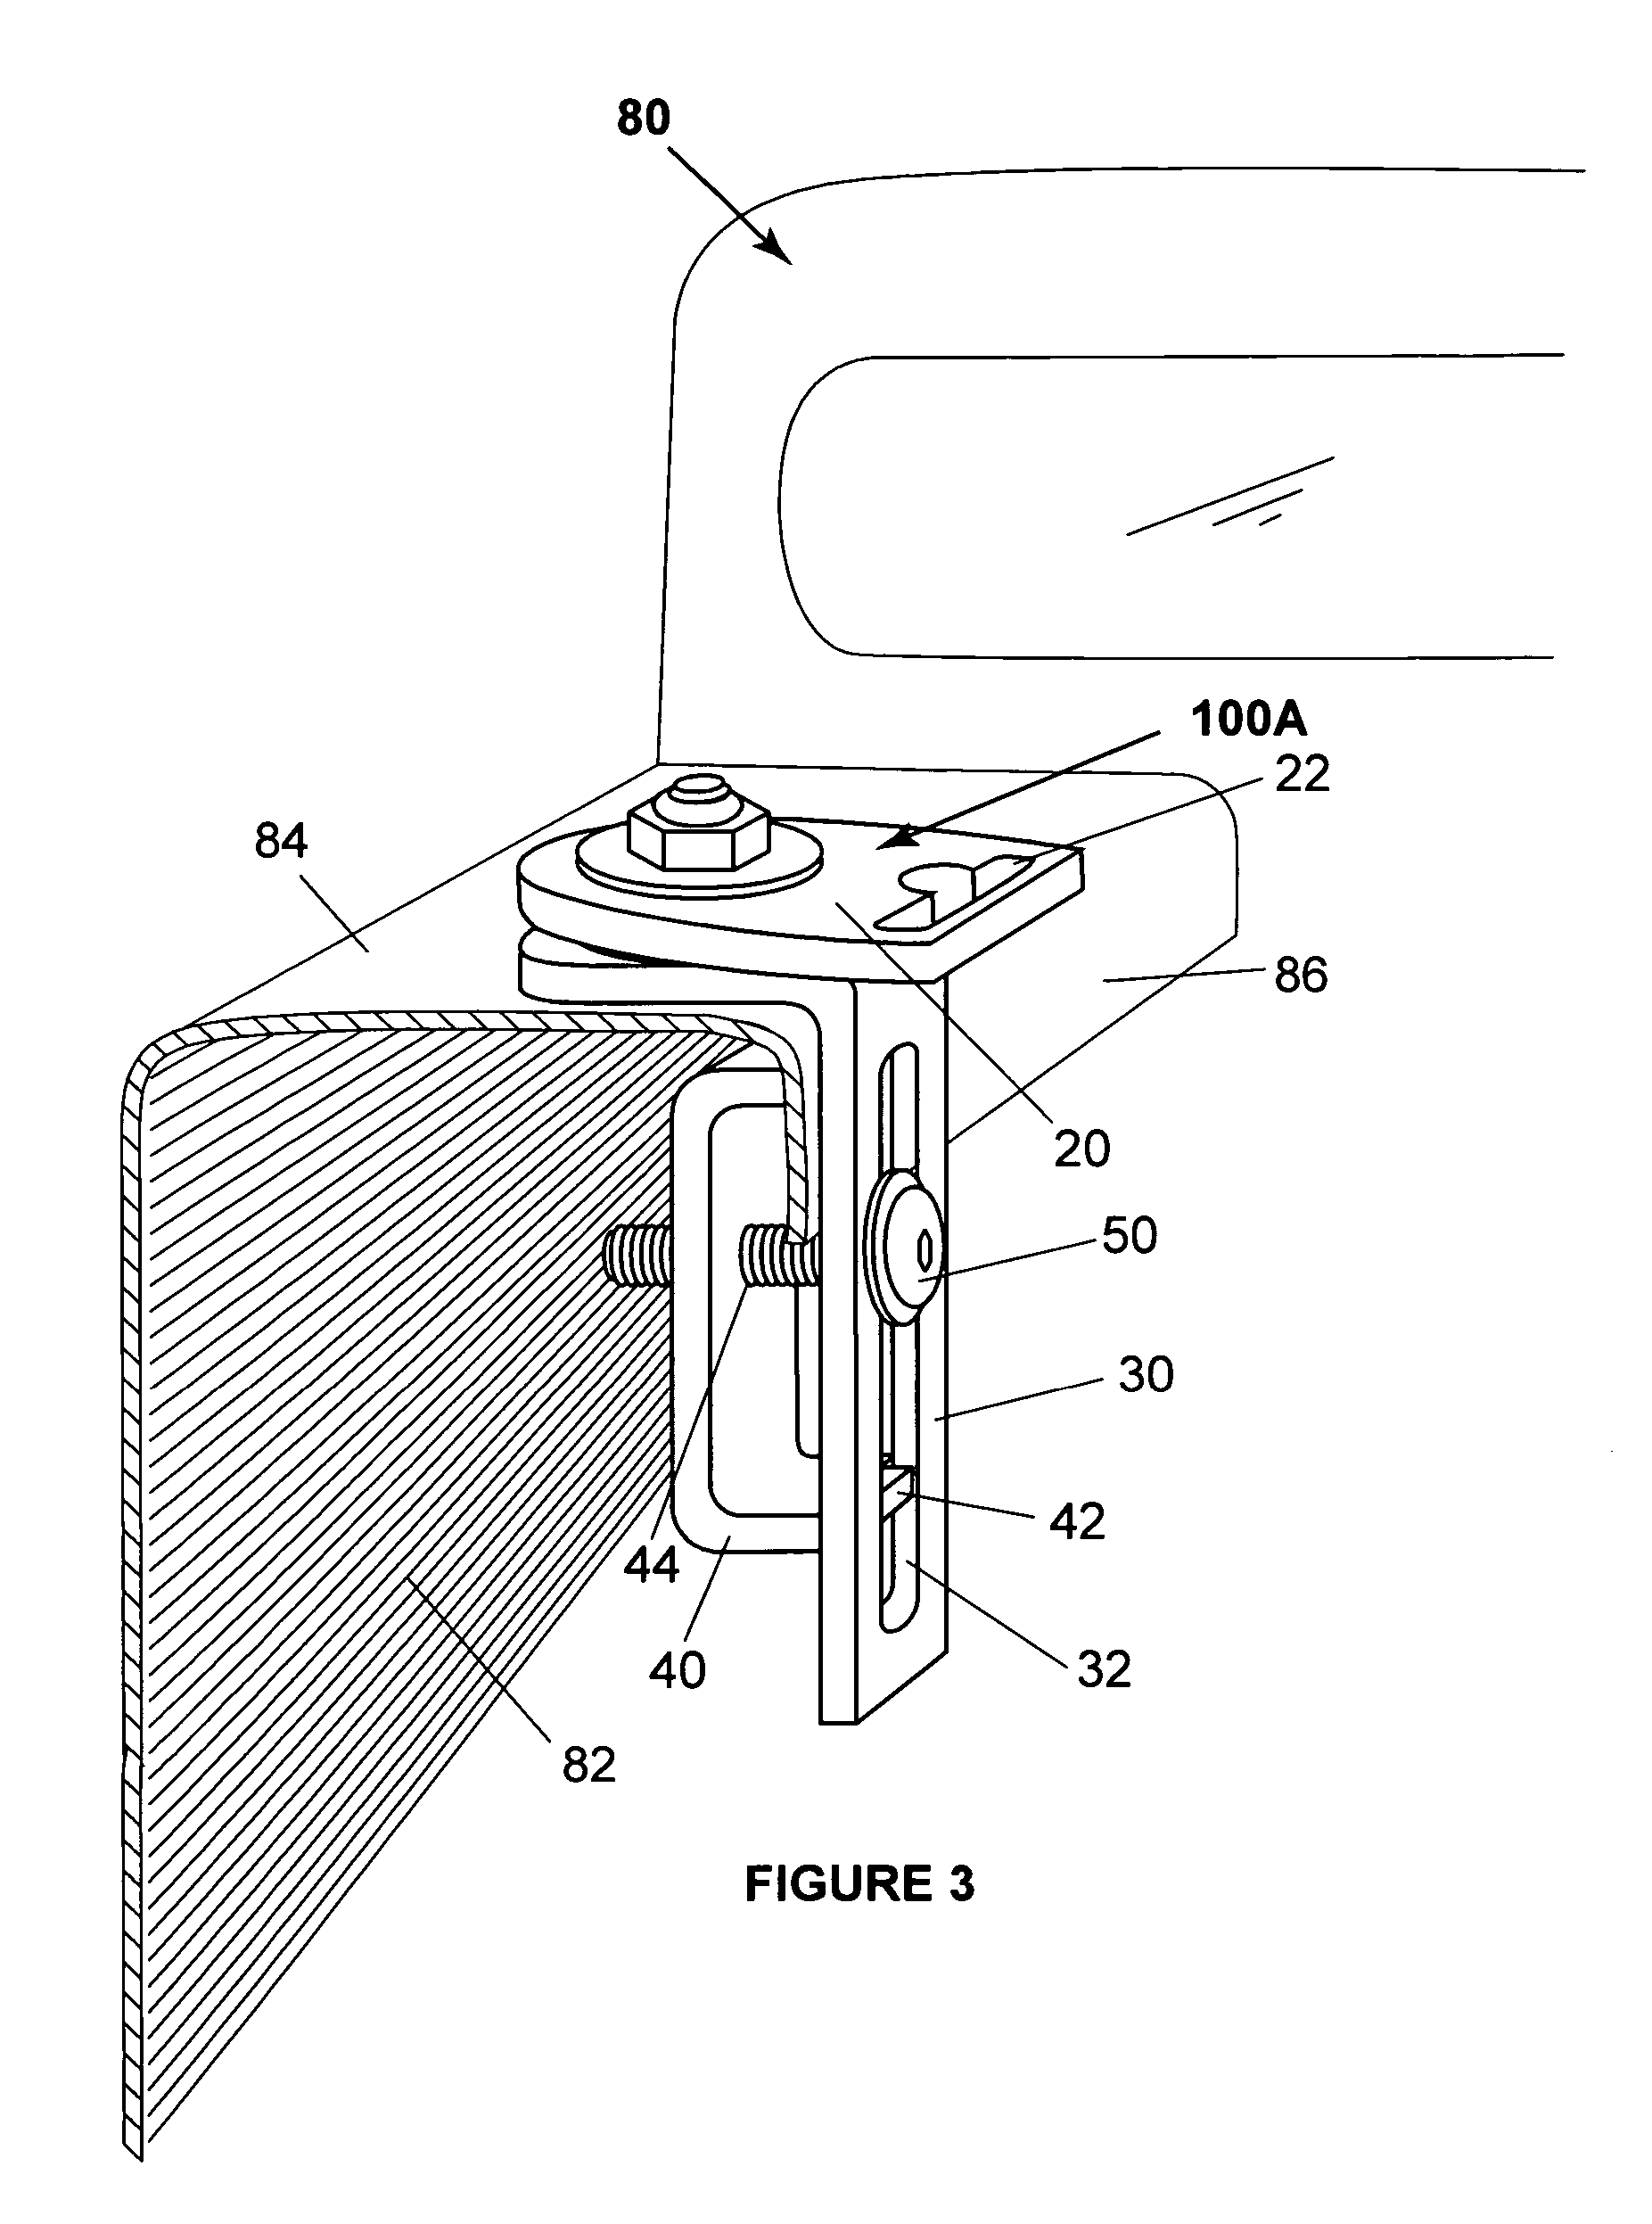 Cargo restraint anchor device for pick-up trucks